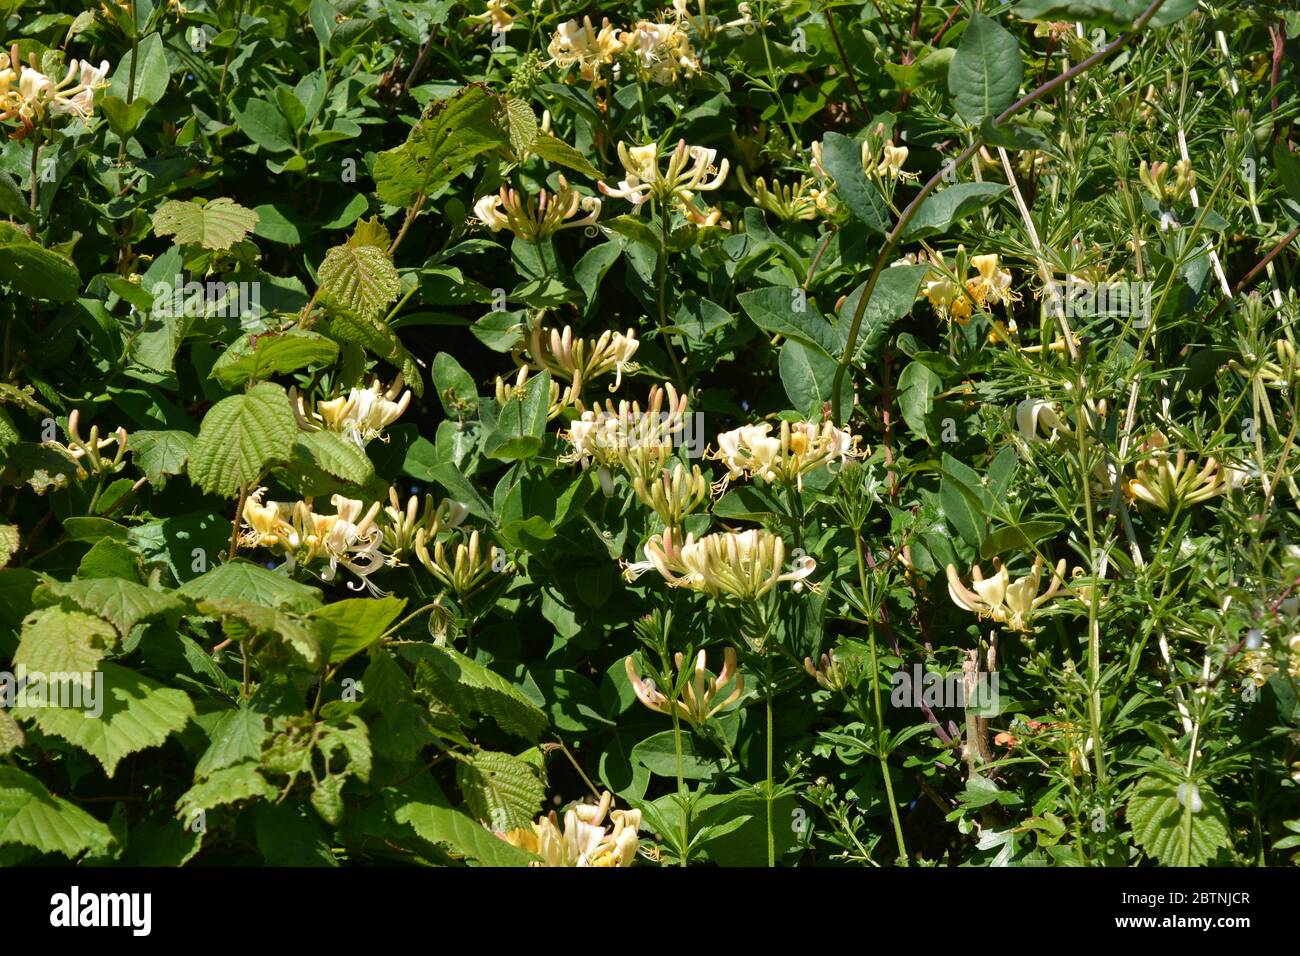 Hedgerow with Sticky Willy and Wild Honeysuckle in  flower, also known as Lonicera periclymenum Stock Photo